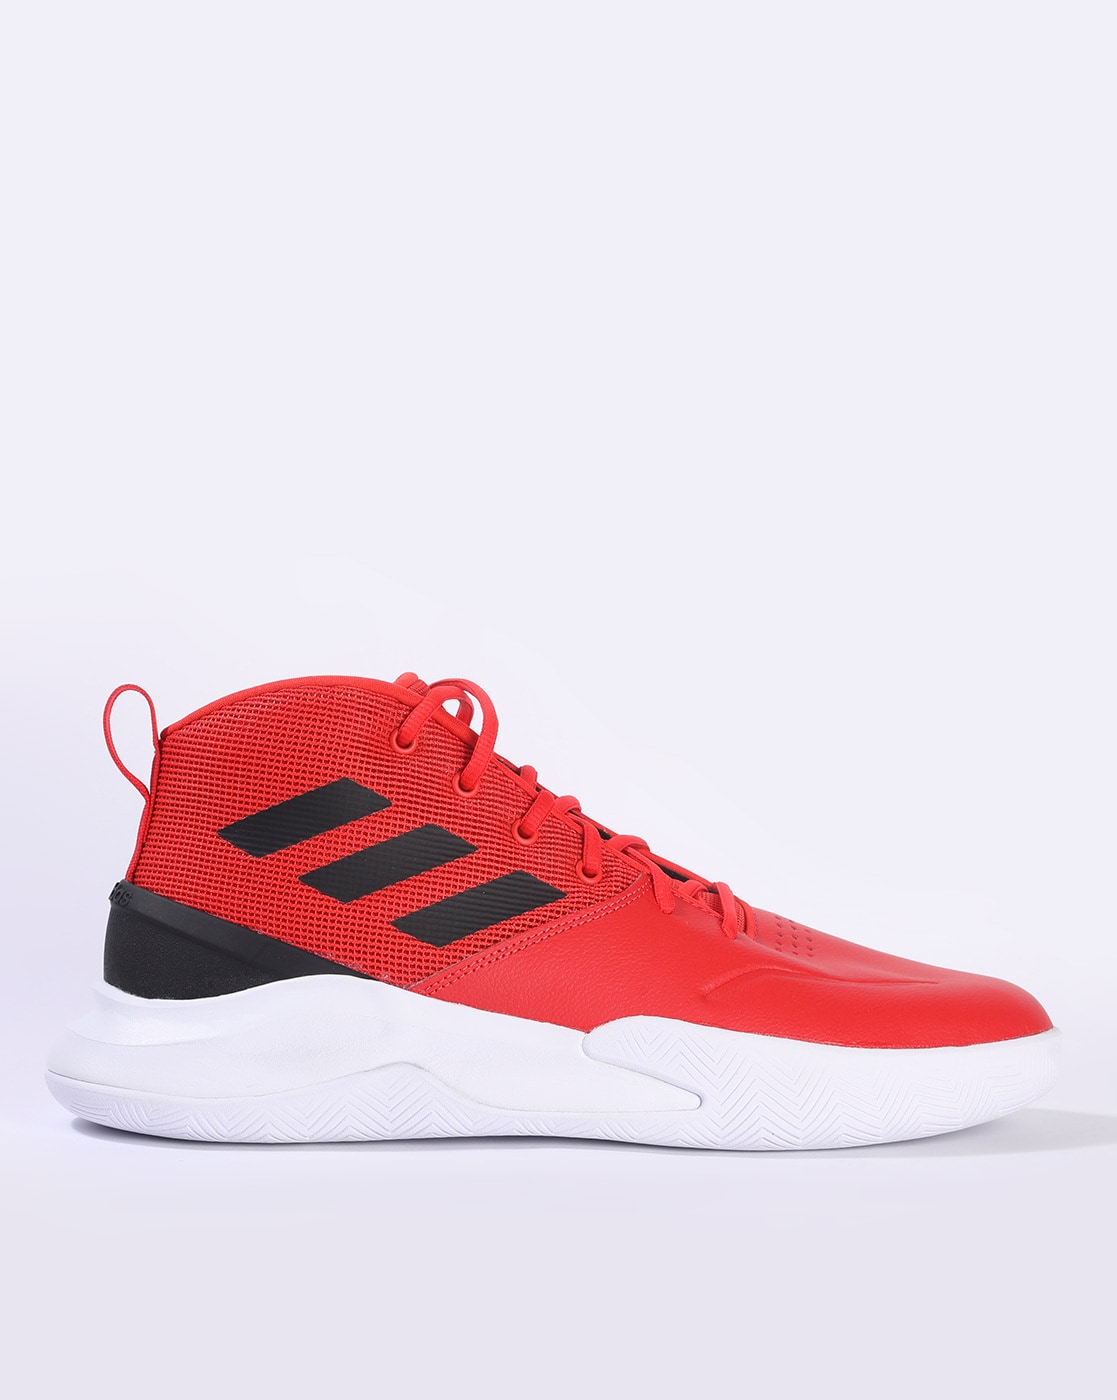 adidas own the game red